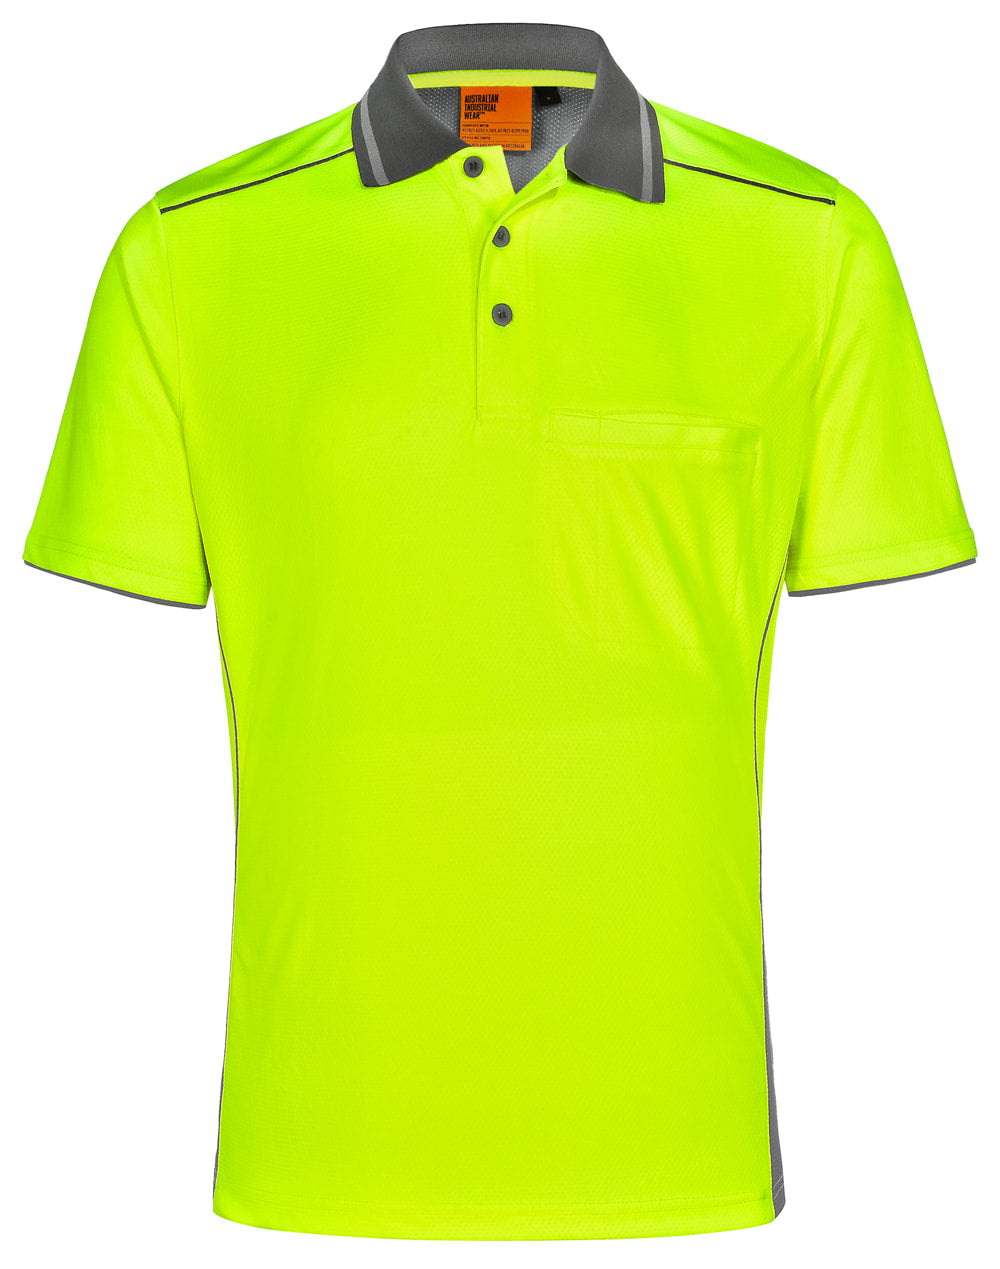 AIW SW79 UNISEX HI-VIS BAMBOO CHARCOAL VENTED SS POLO